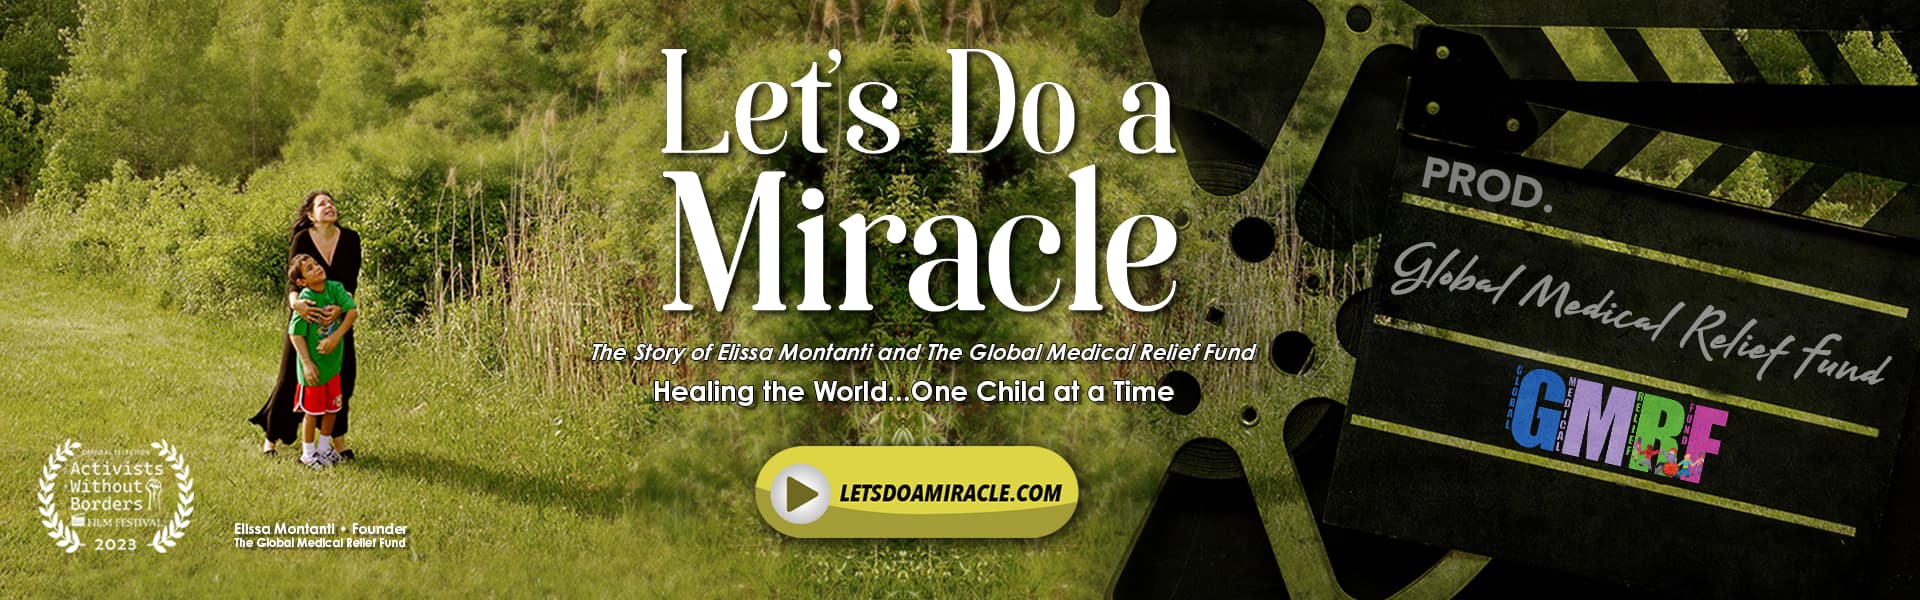 Lets Do a Miracle